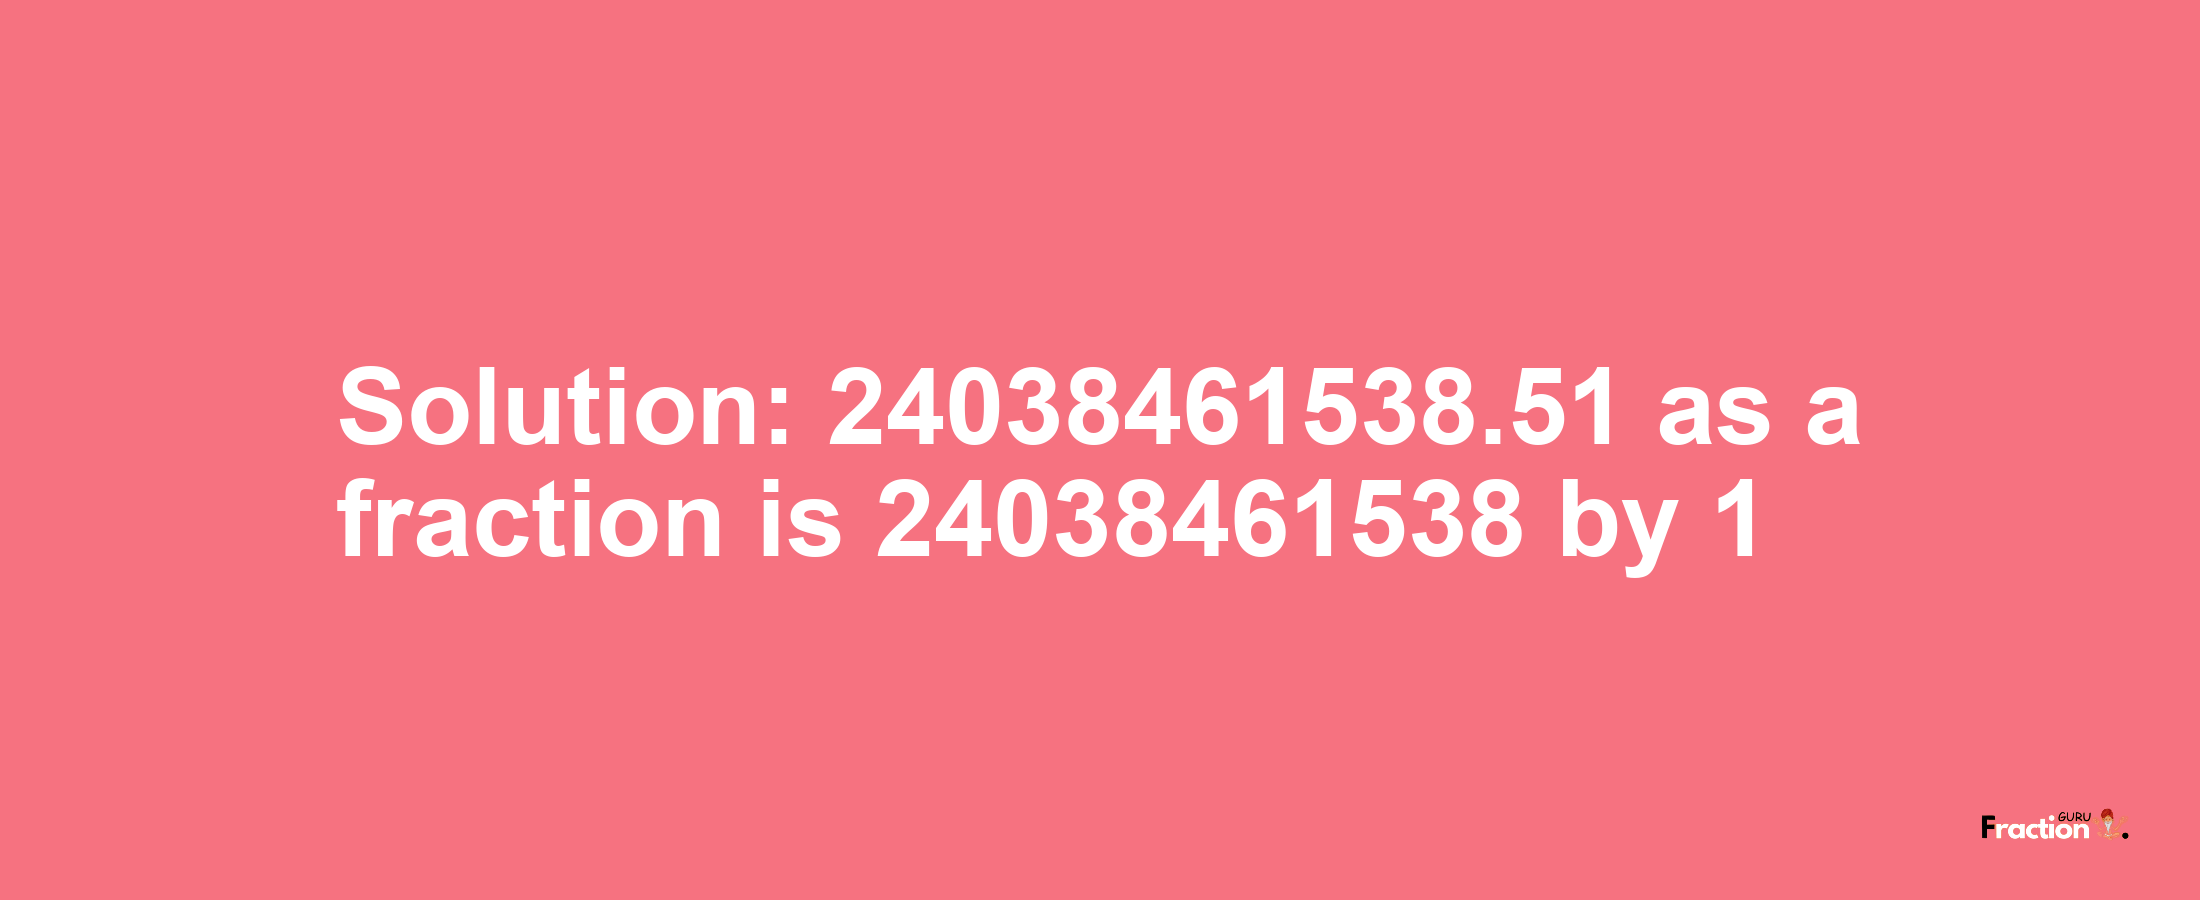 Solution:24038461538.51 as a fraction is 24038461538/1